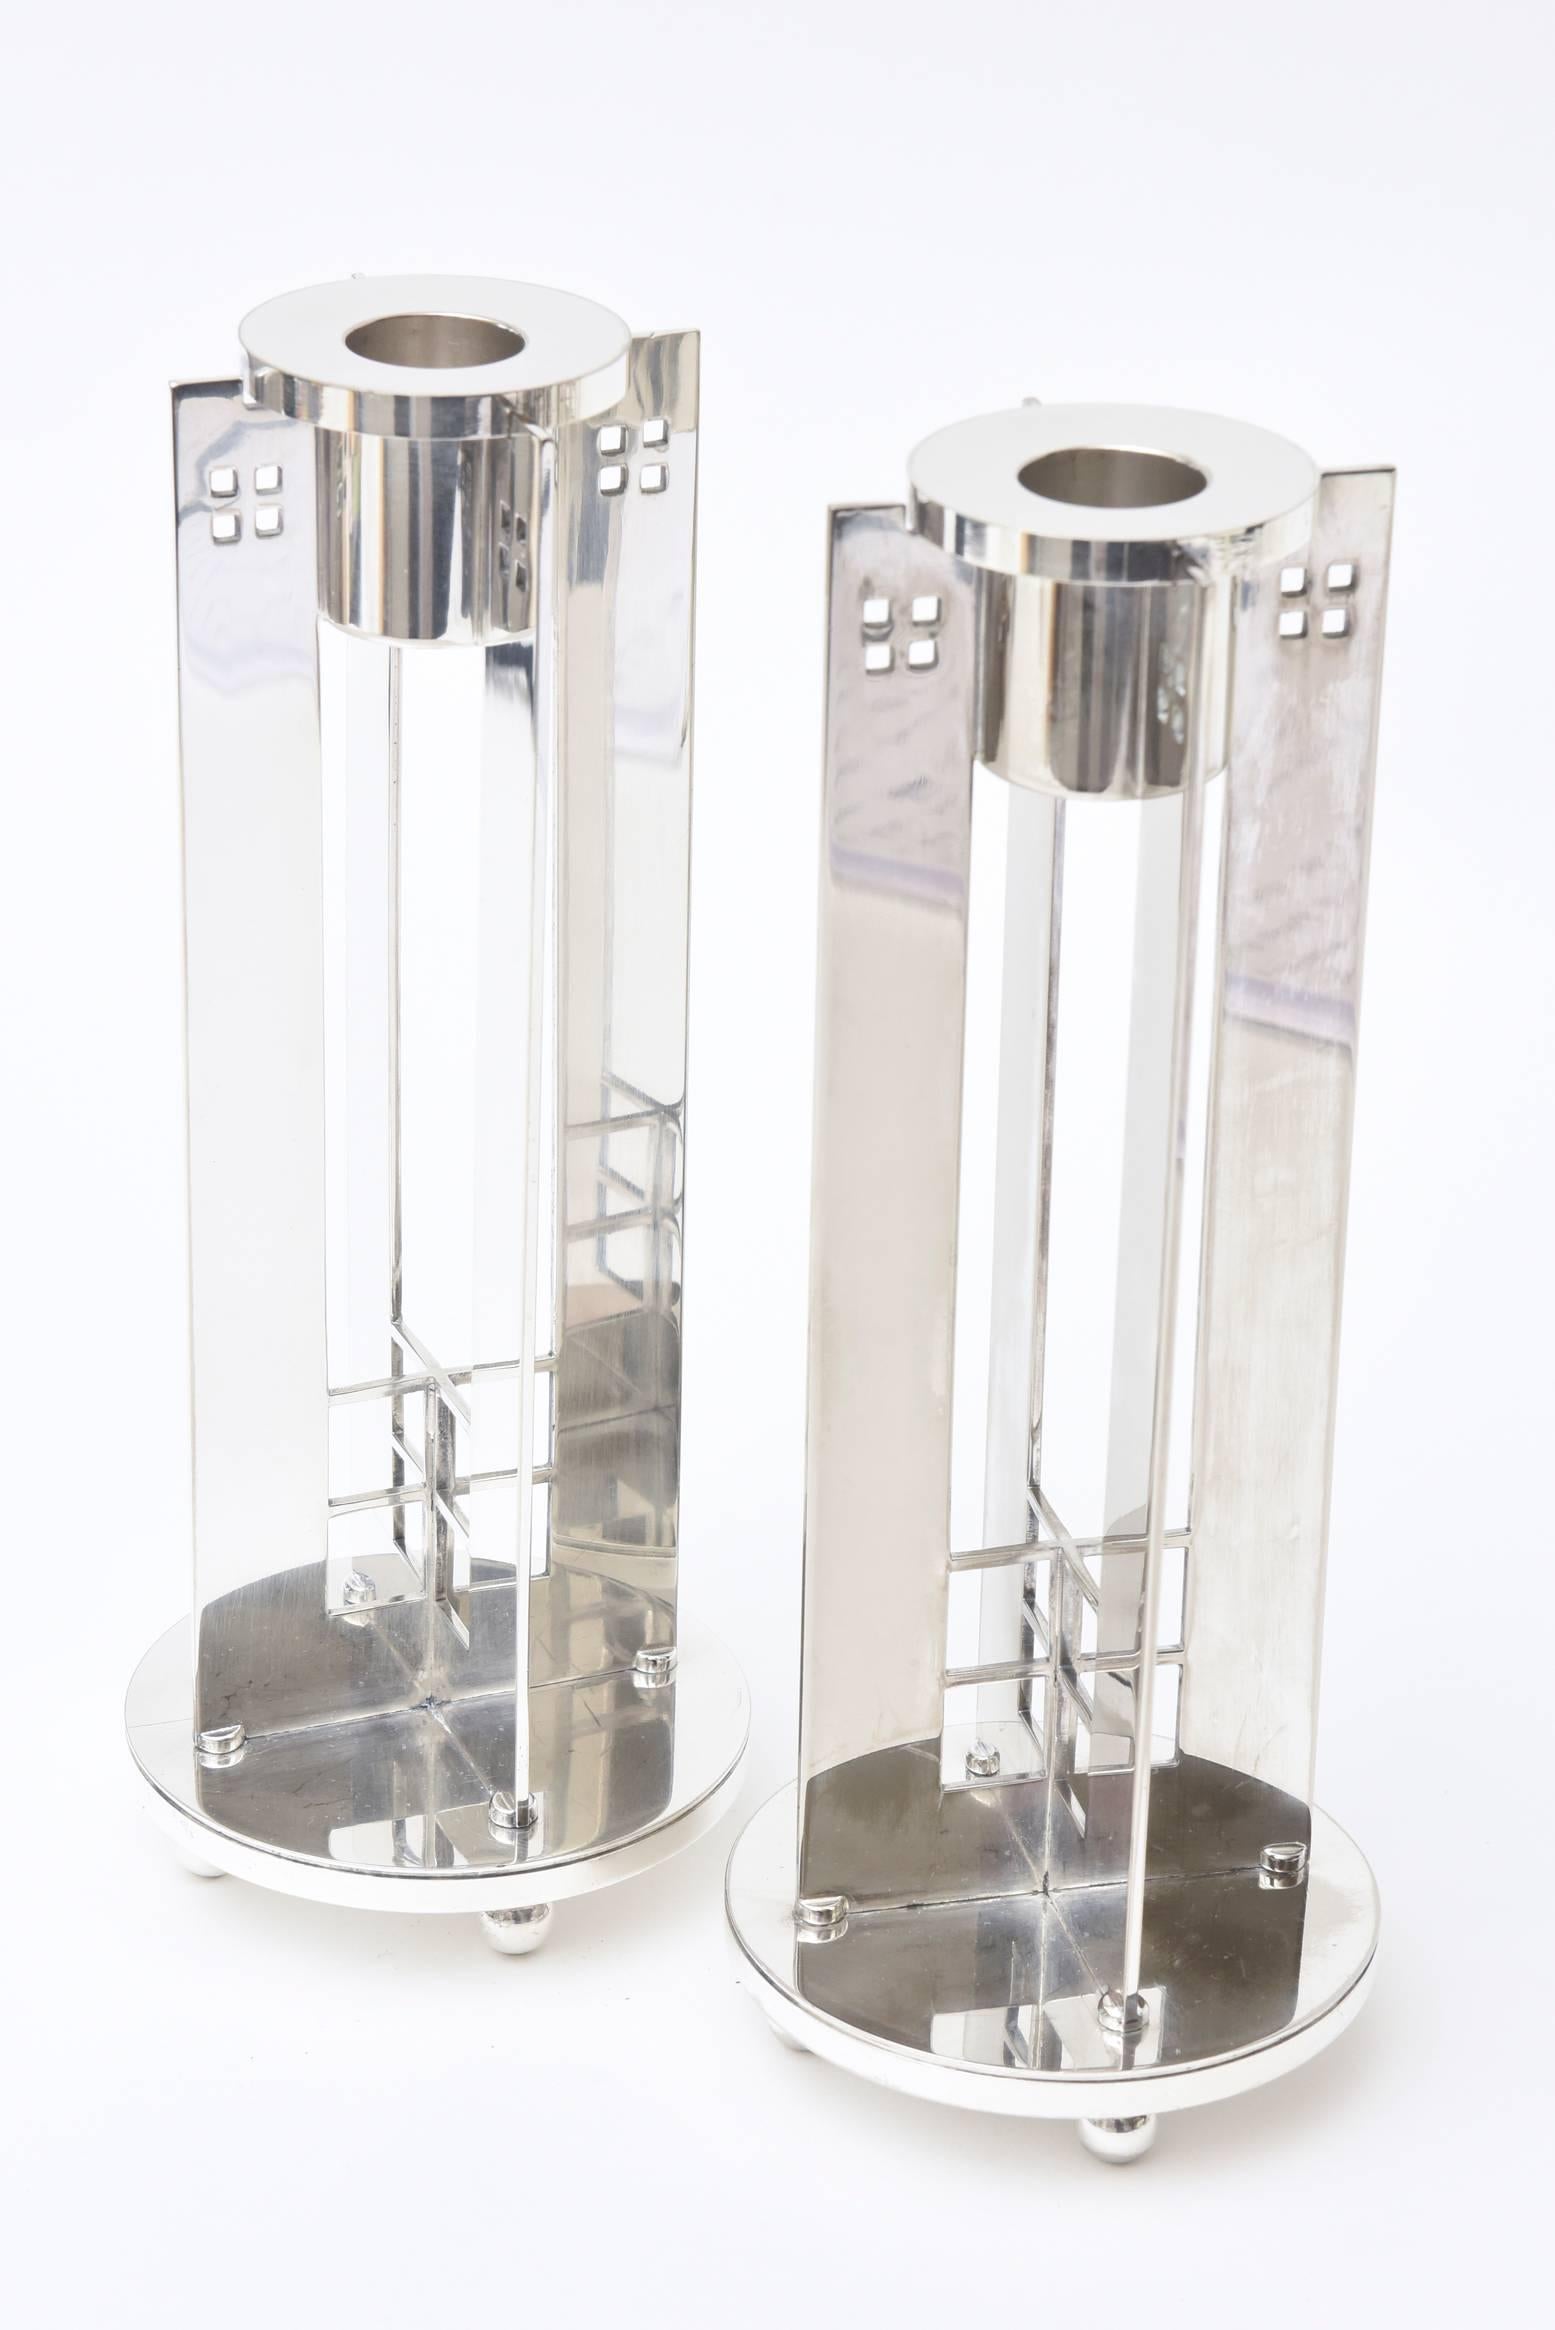 These modernist and architectural signed silver plate Italian candlesticks are the work and collaboration of Richard Meier; the famed architect and the company
Swid Powell. They are entitled 